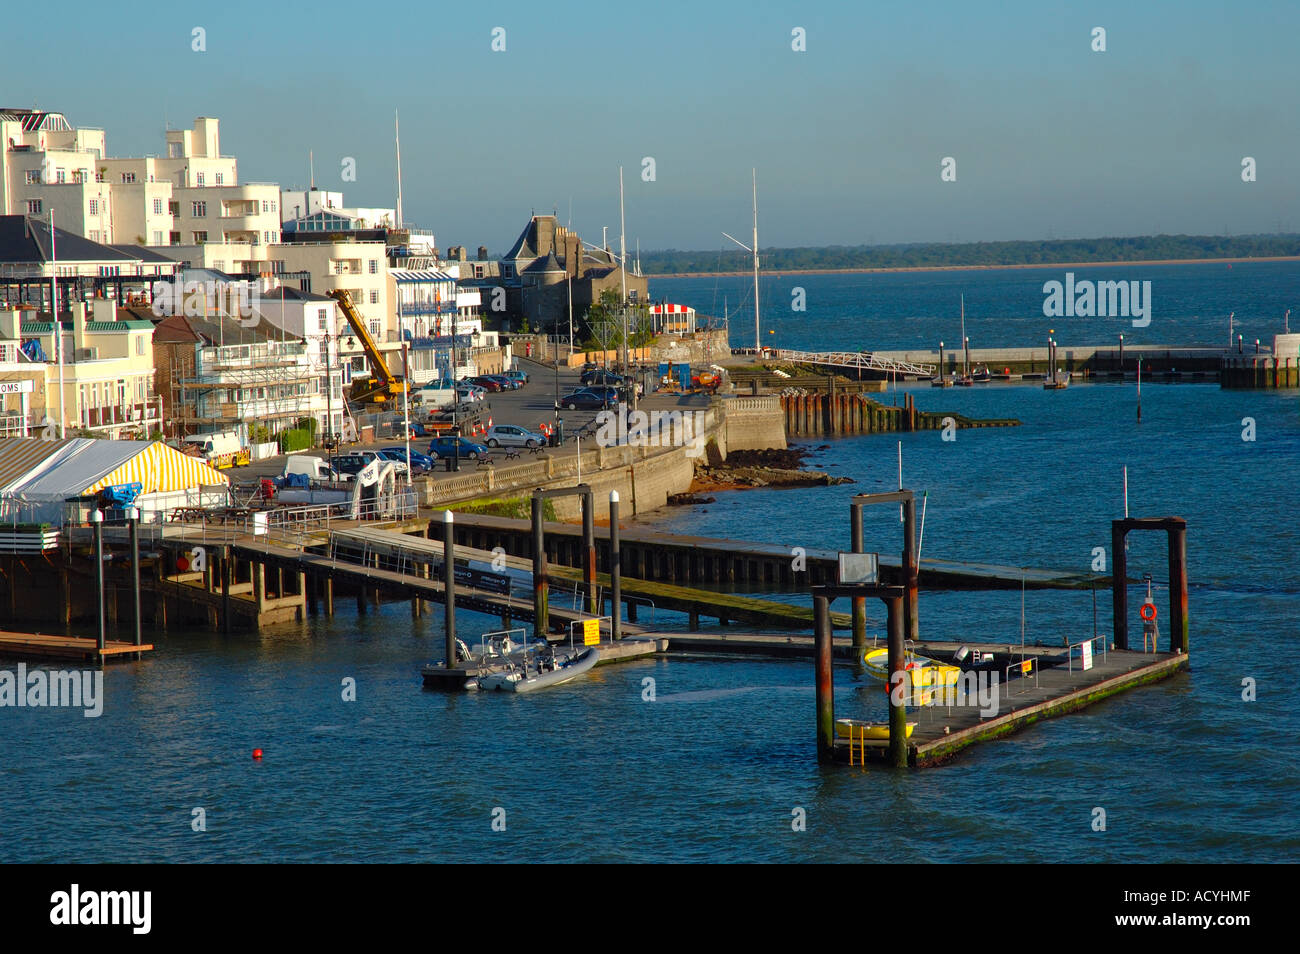 Cowes Waterfront, Cowes, Isle of Wight, England, UK, GB. Stock Photo